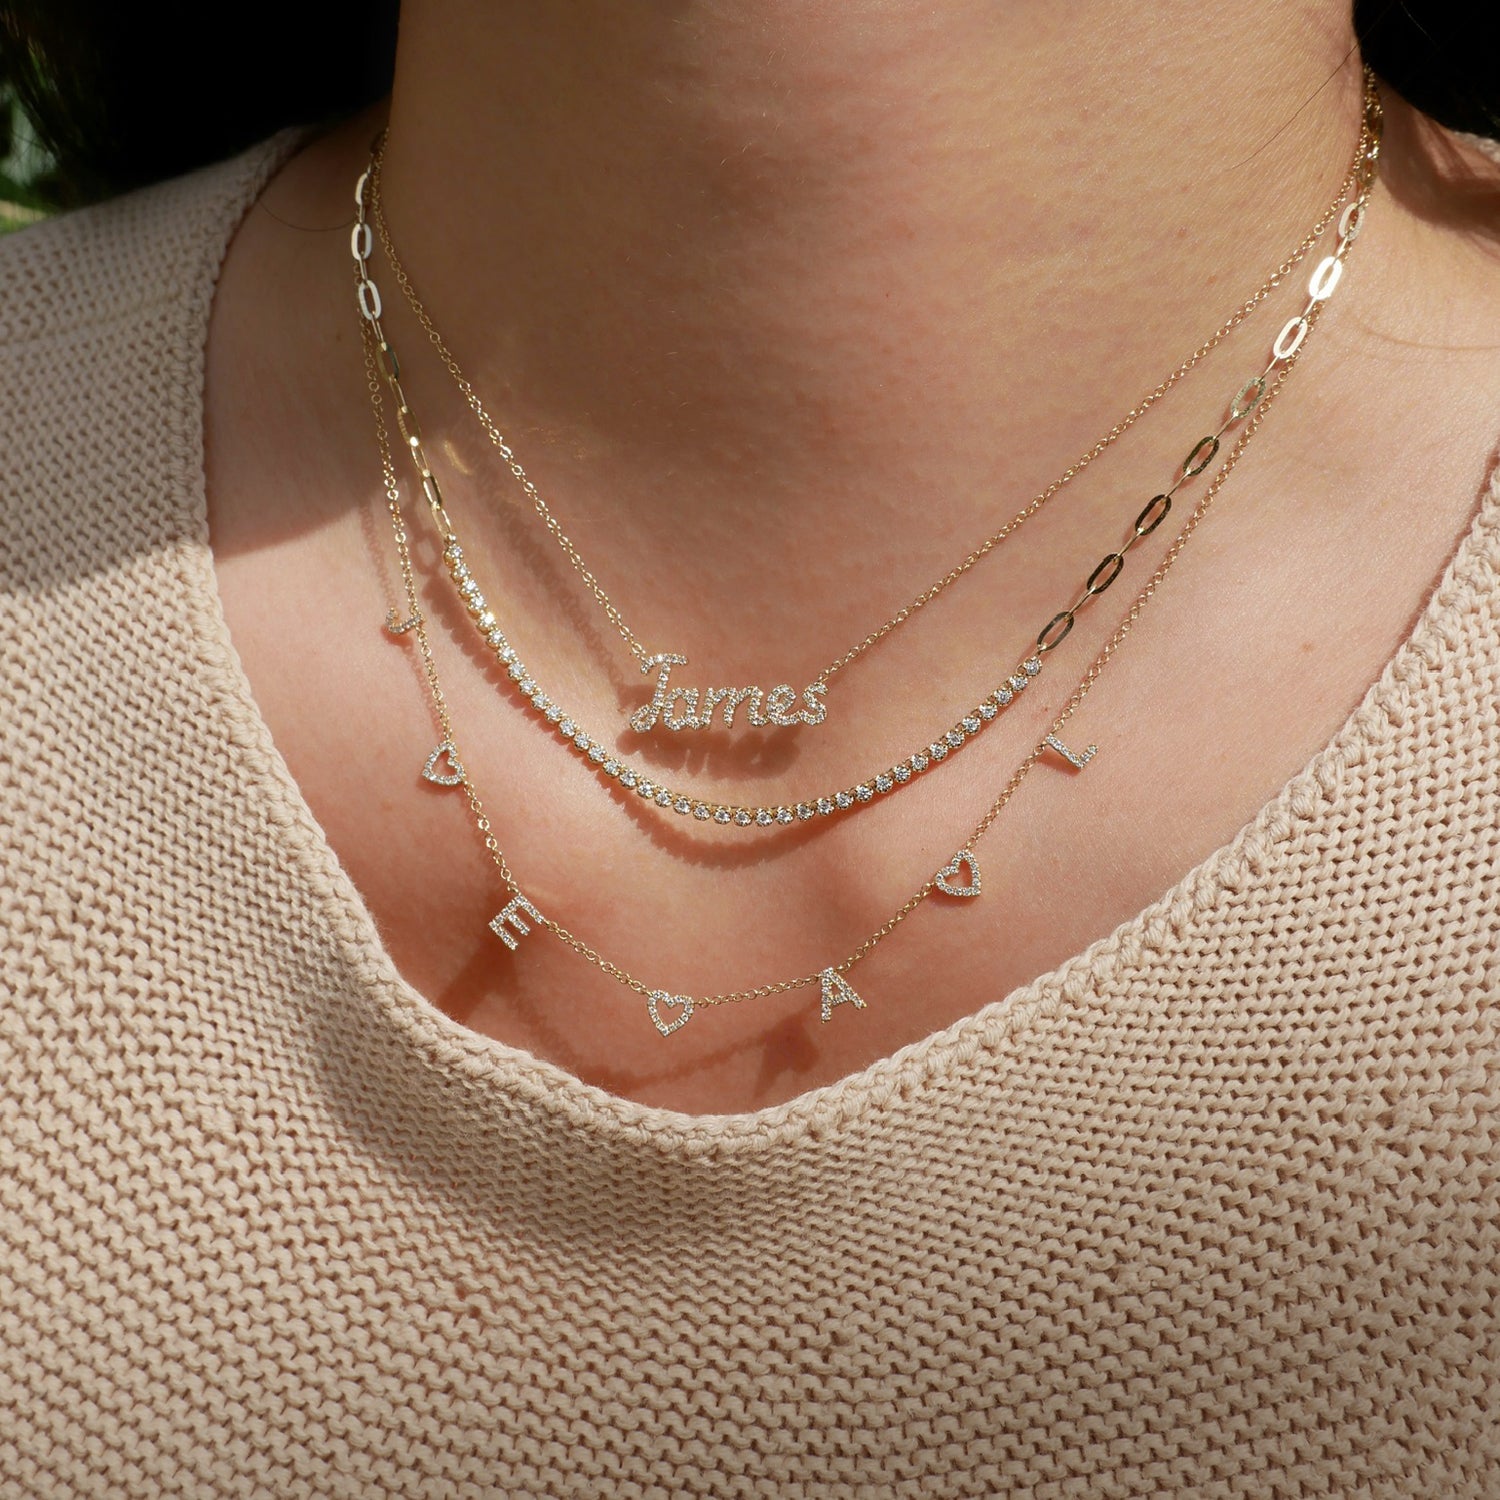 EF Collection 14k personalized necklaces with diamonds with initials JAMES and J E A and L styled on neck